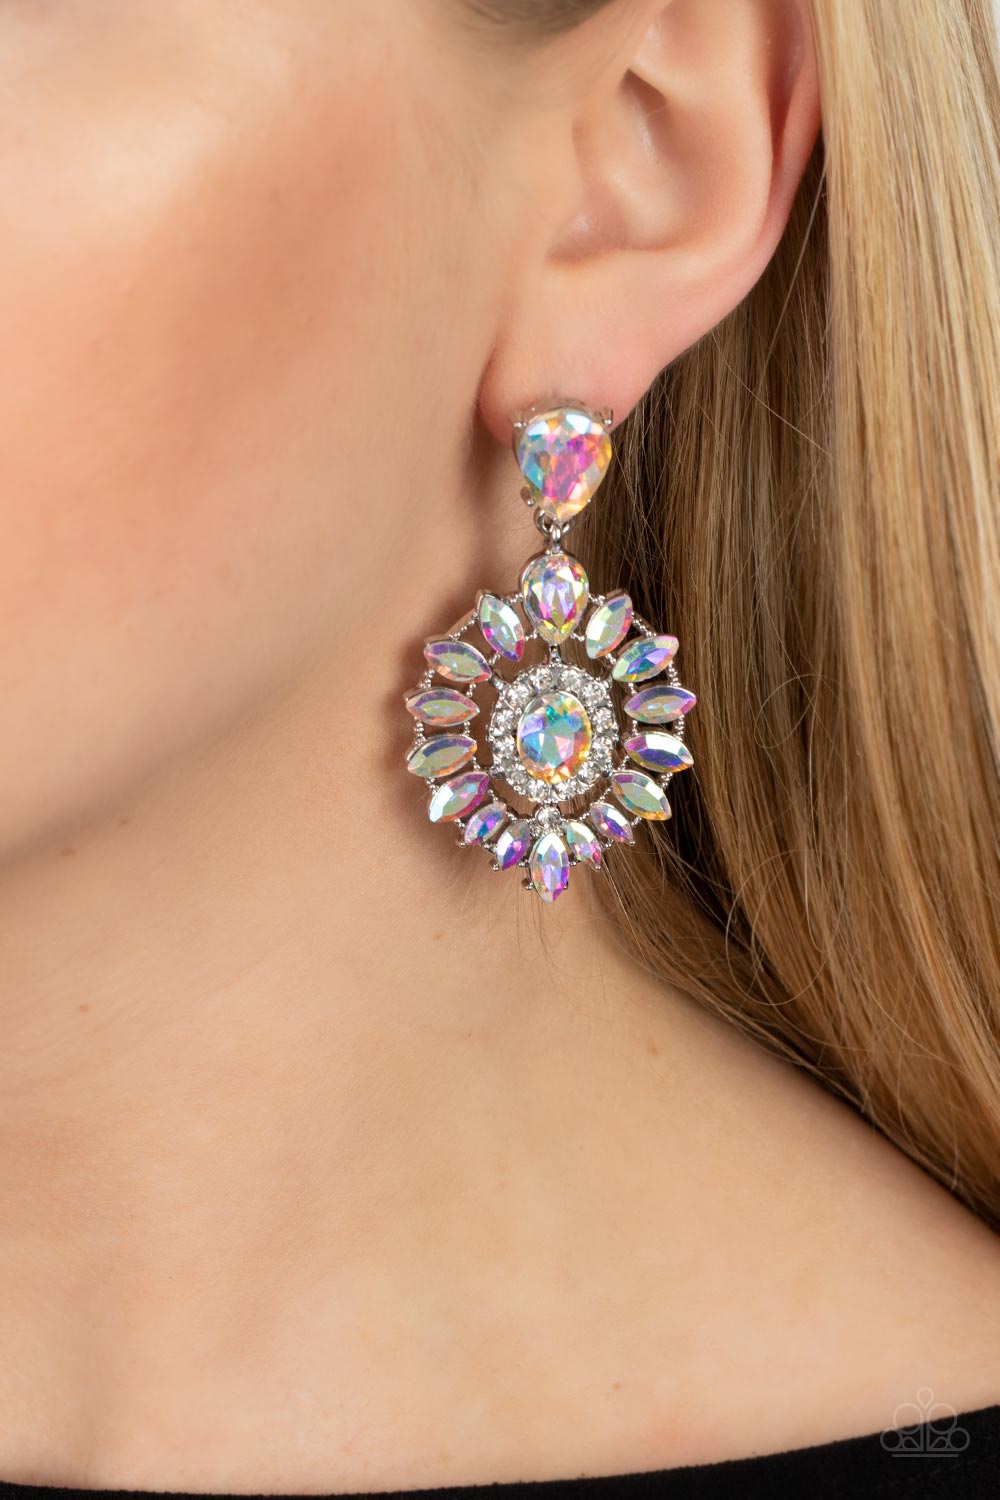 Paparazzi Accessories - My Good LUXE Charm - Multi Iridescent Earrings bordered in dainty white rhinestones, an iridescent gem is pressed into the center of an explosion of iridescent marquise cut rhinestones. The icy frame swings from the bottom of a solitaire iridescent teardrop rhinestone, adding flirtatious movement to the jaw-dropping display. Earring attaches to a standard post fitting. Due to its prismatic palette, color may vary.  Sold as one pair of post earrings.